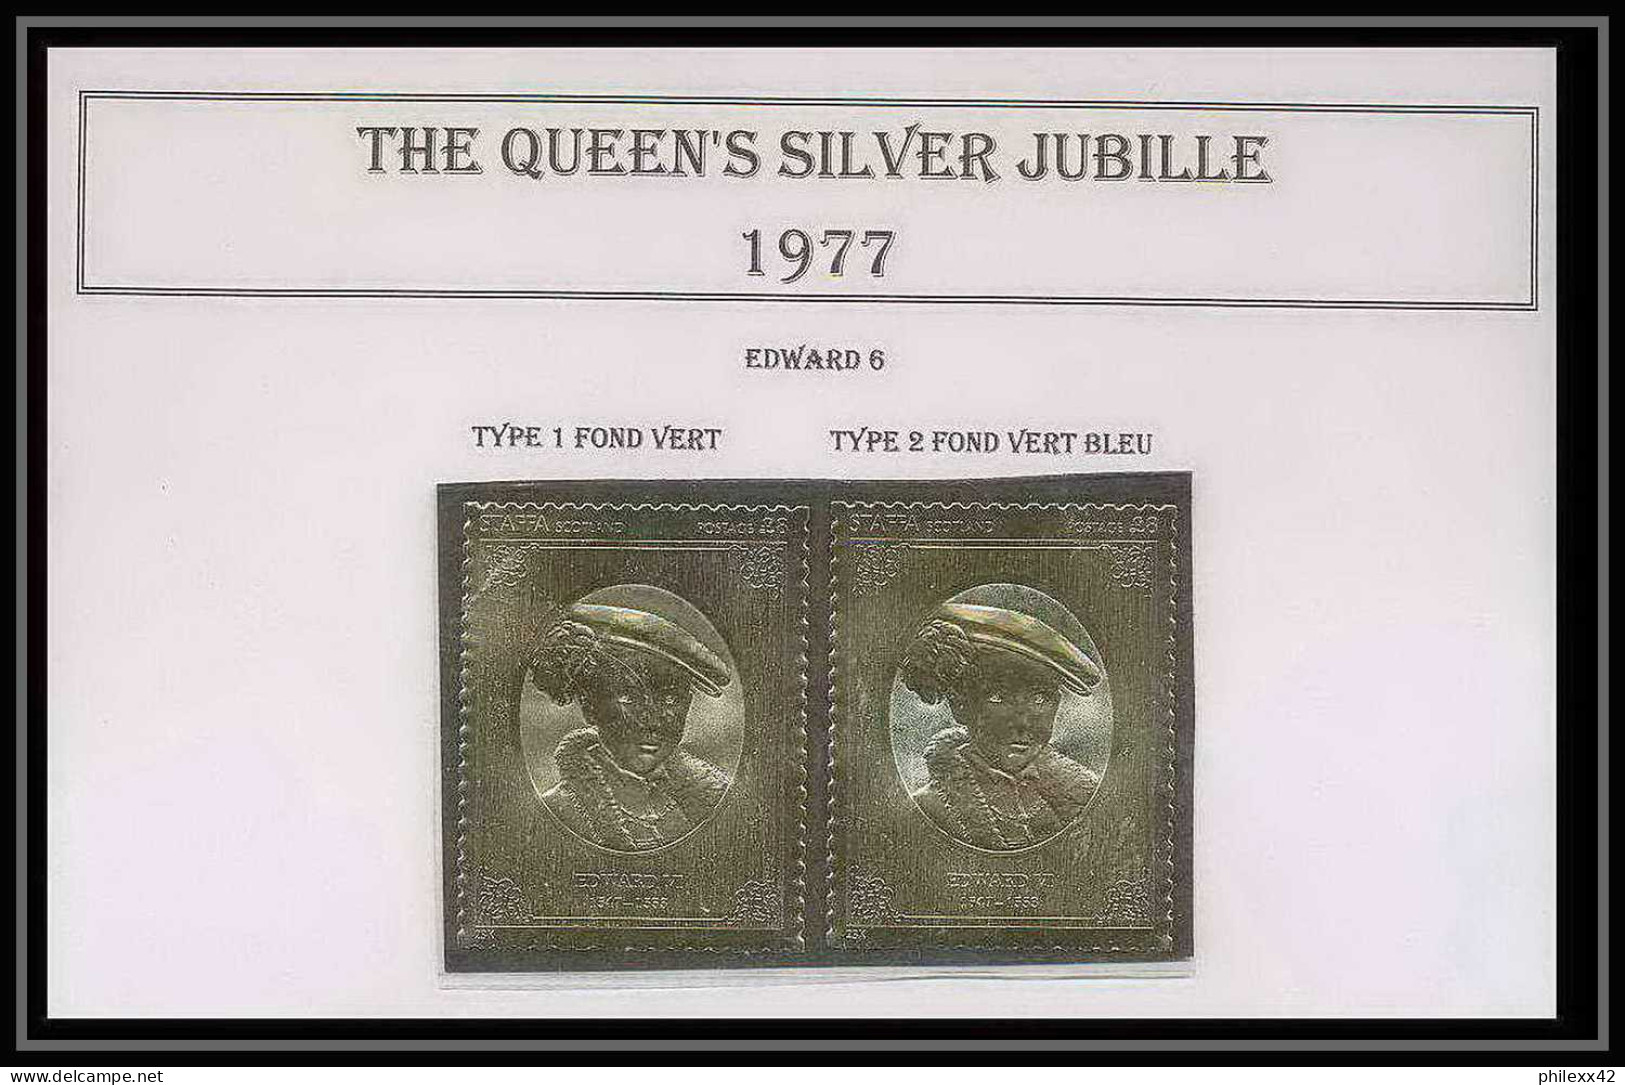 460 Staffa Scotland The Queen's Silver Jubilee 1977 OR Gold Stamps Monarchy United Kingdom Edward 6 Type 1&2 Neuf** Mnh - Scozia